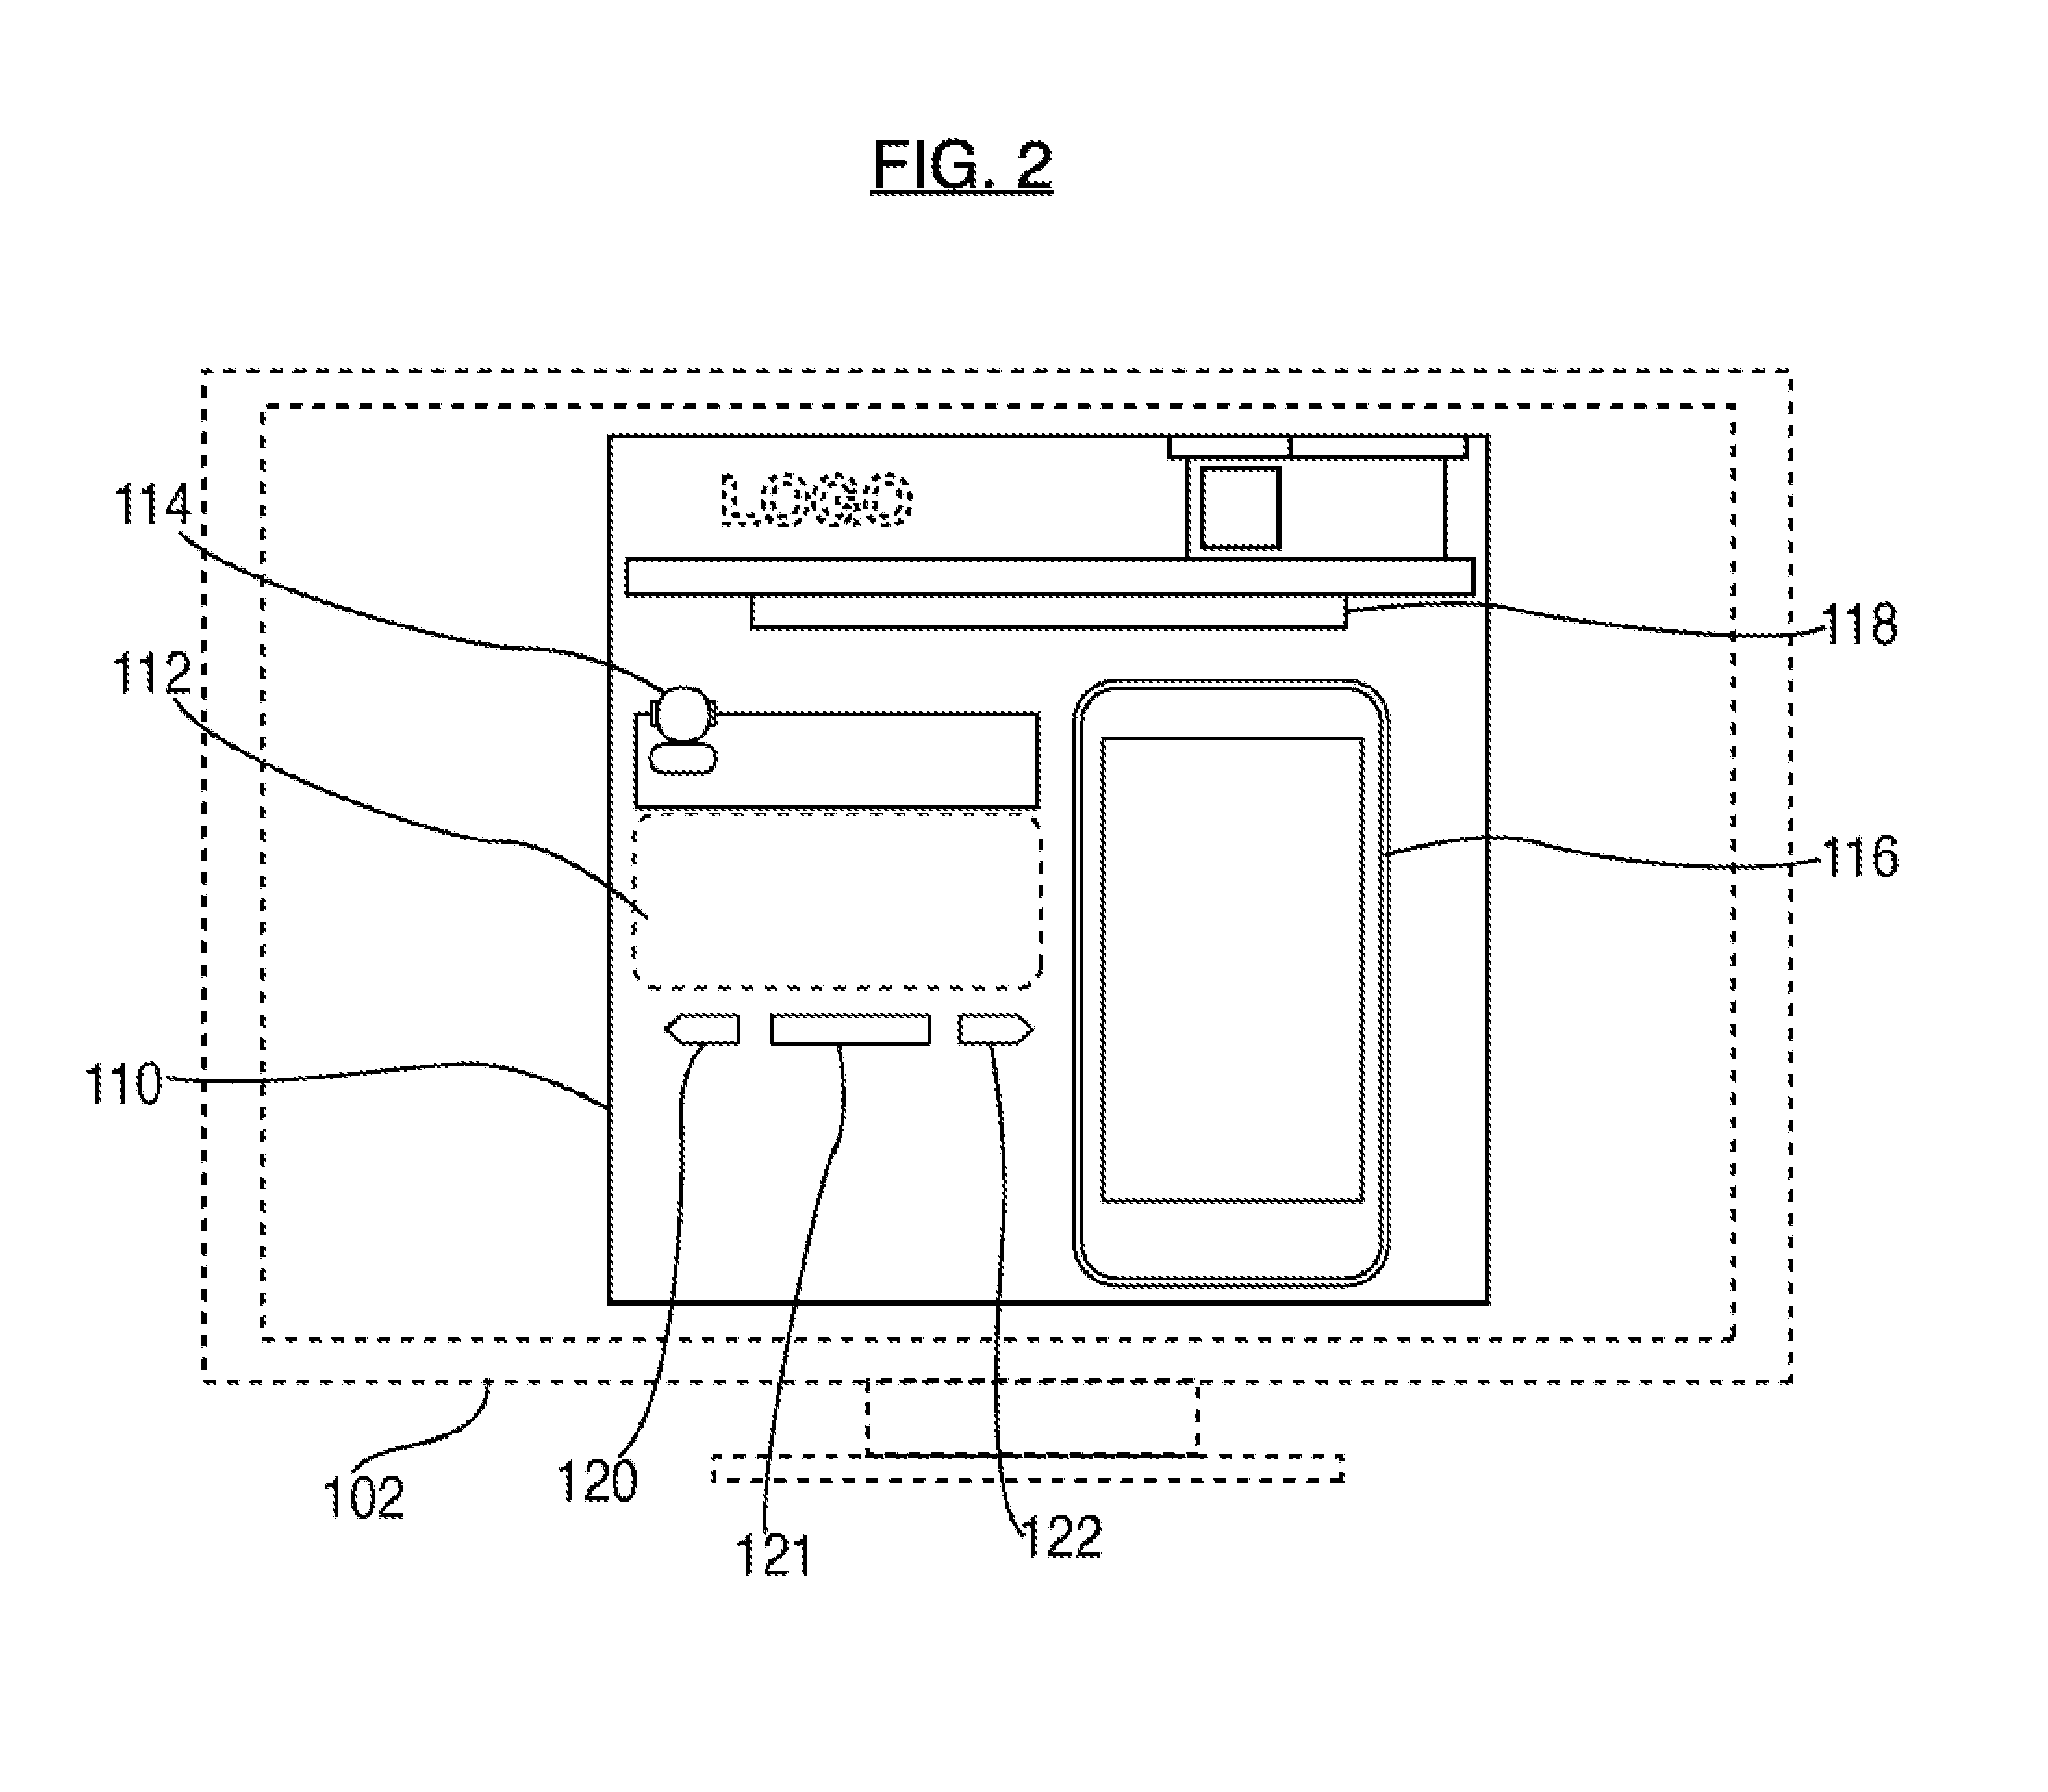 Systems and methods for a voice- and gesture-controlled mobile application development and deployment platform